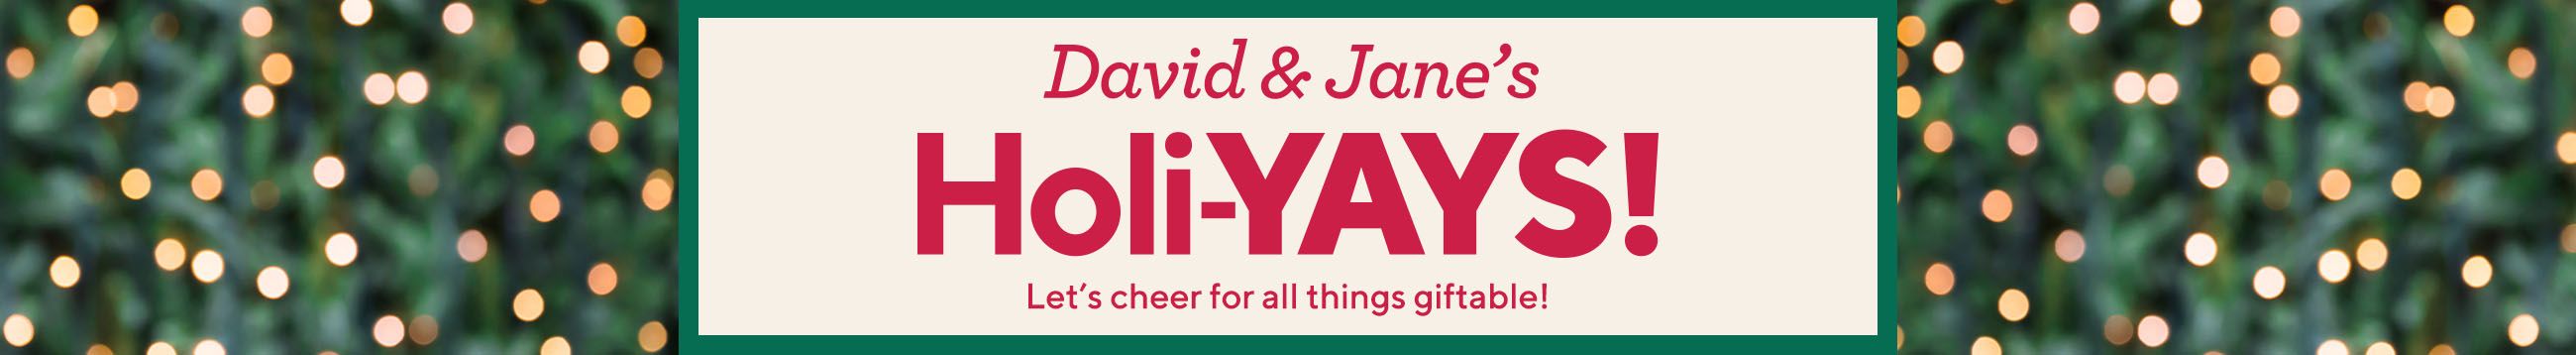 David & Jane's Holi-YAYS.  Let's cheer for all things giftable.